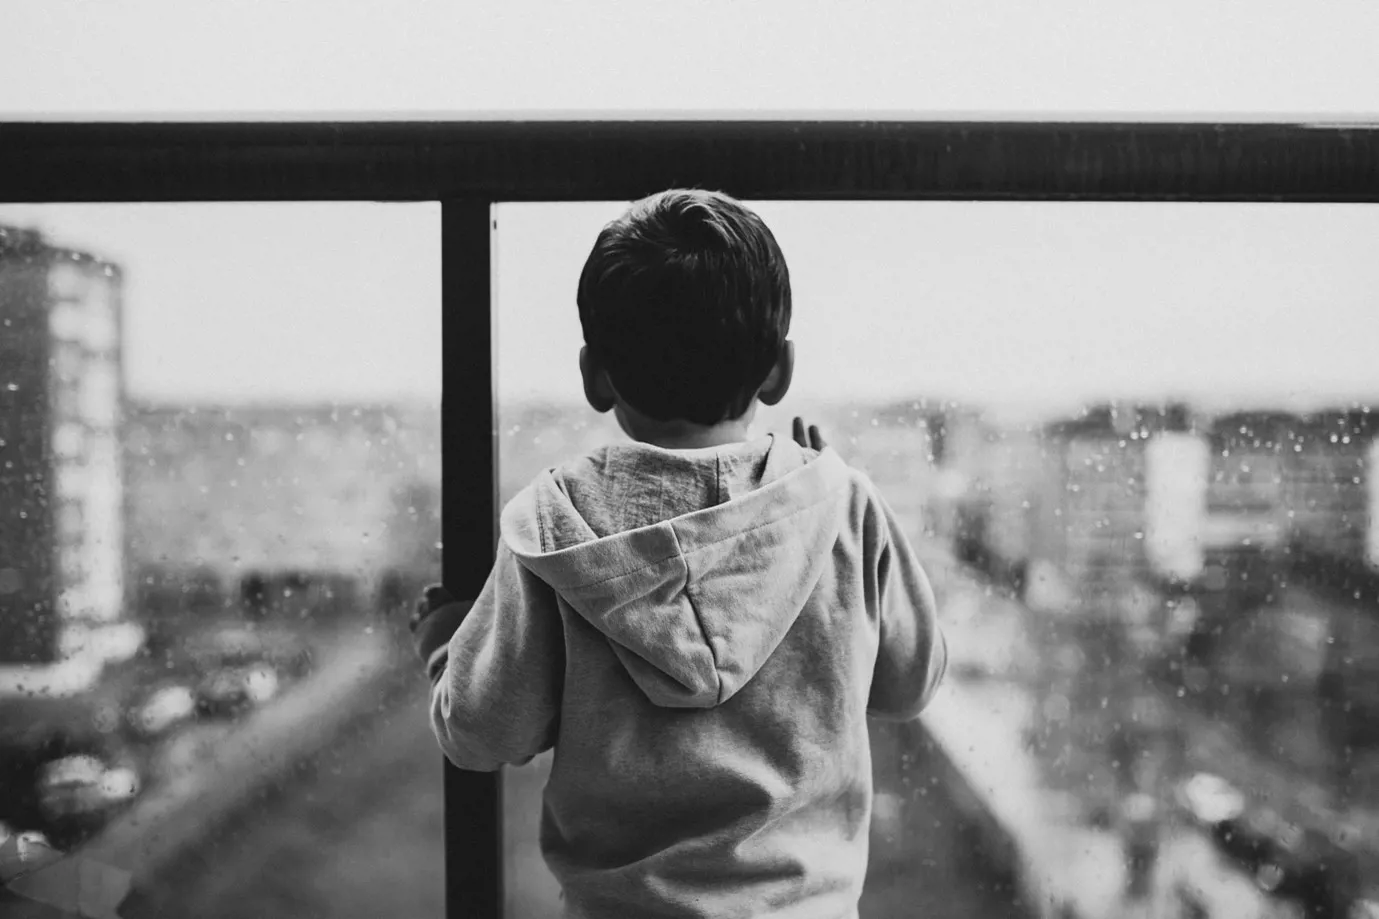 a black and white image of a young boy on a balcony overlooking a city